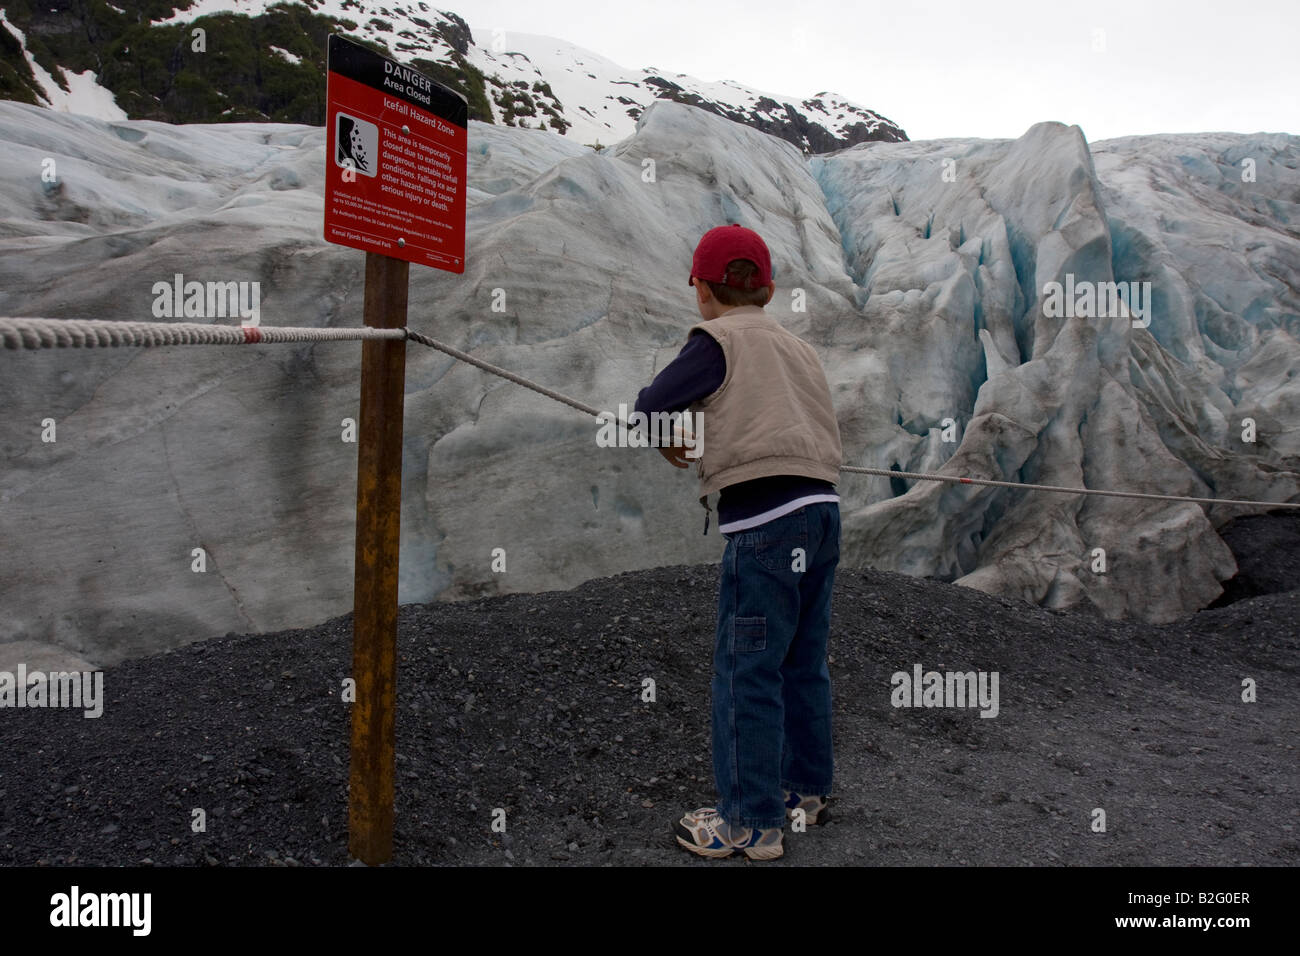 Keep out danger Sign in front of Exit Glacier, part of the harding Icefield, within Kenai Fjords National Park, Seward, Alaska Stock Photo